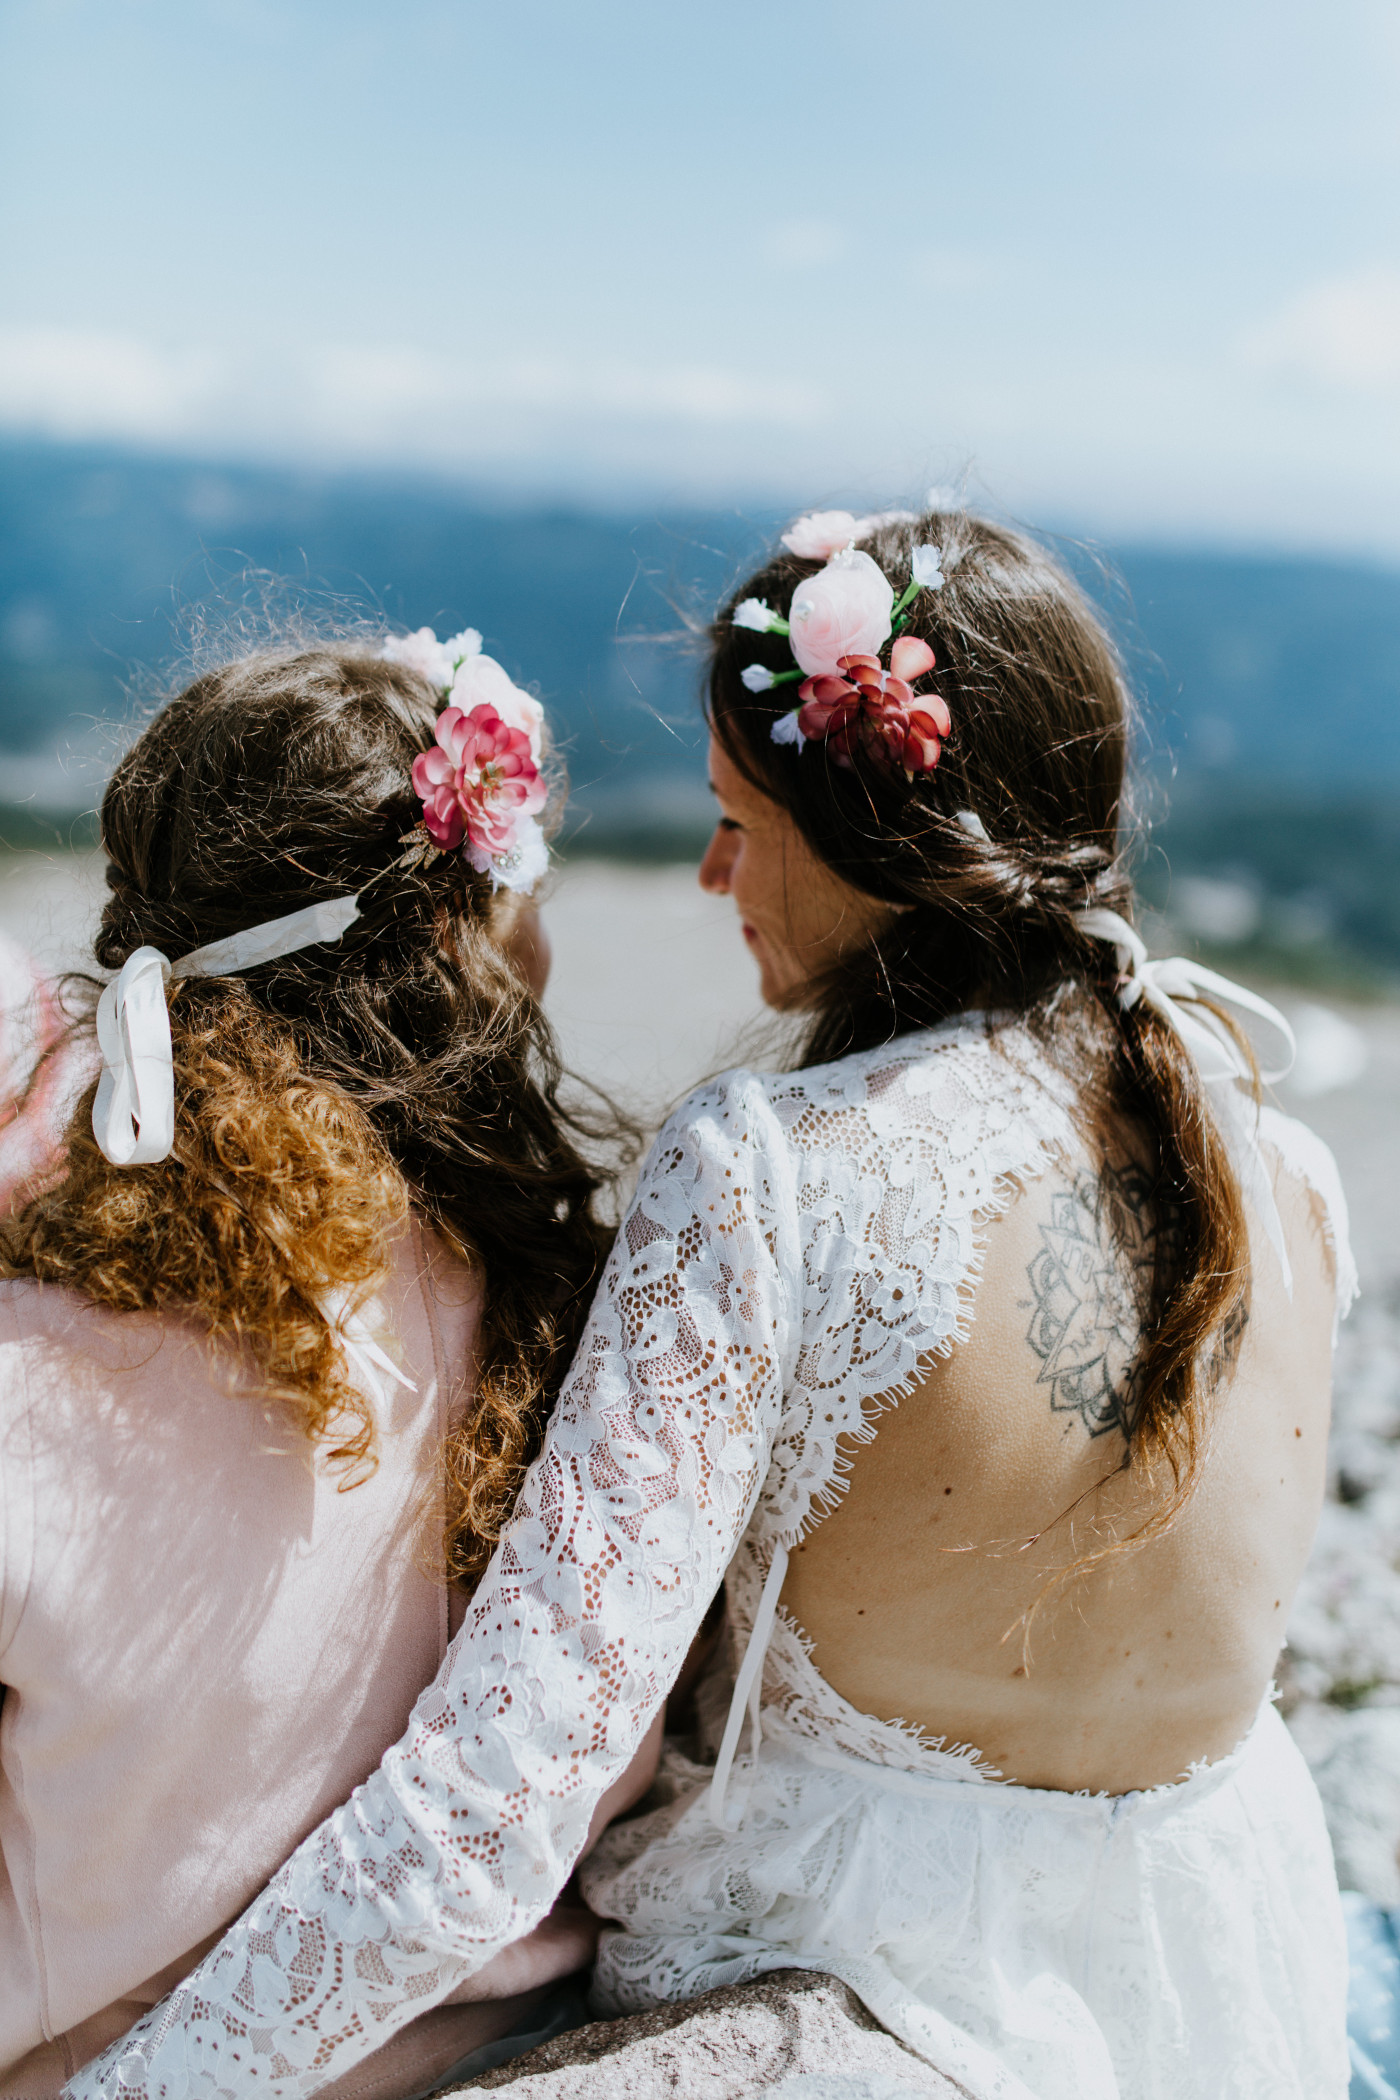 Margaux and Heather sit side by side and enjoy the view. Elopement photography at Mount Hood by Sienna Plus Josh.